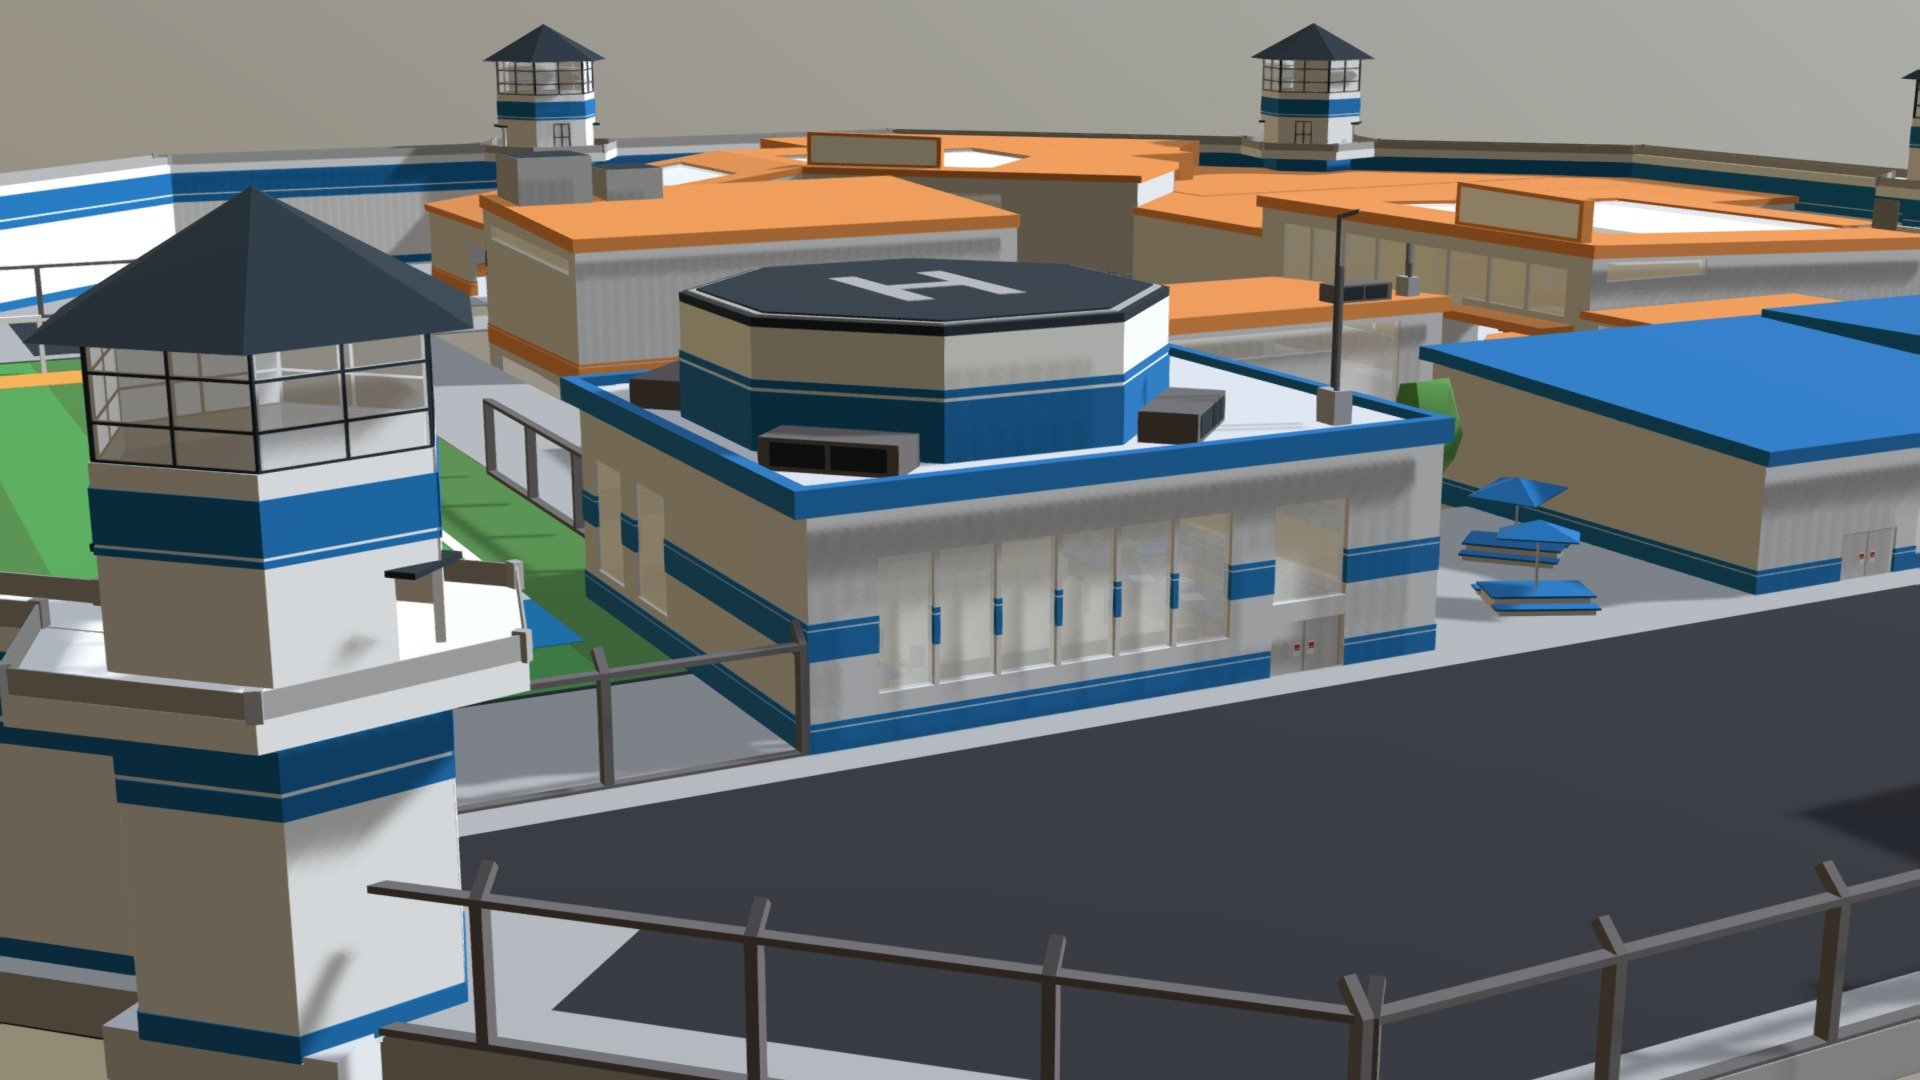 The mad city prison you can play in roblox you will found - Mad City Prison - 3D model by No Name (@s2newton.09) 3d model